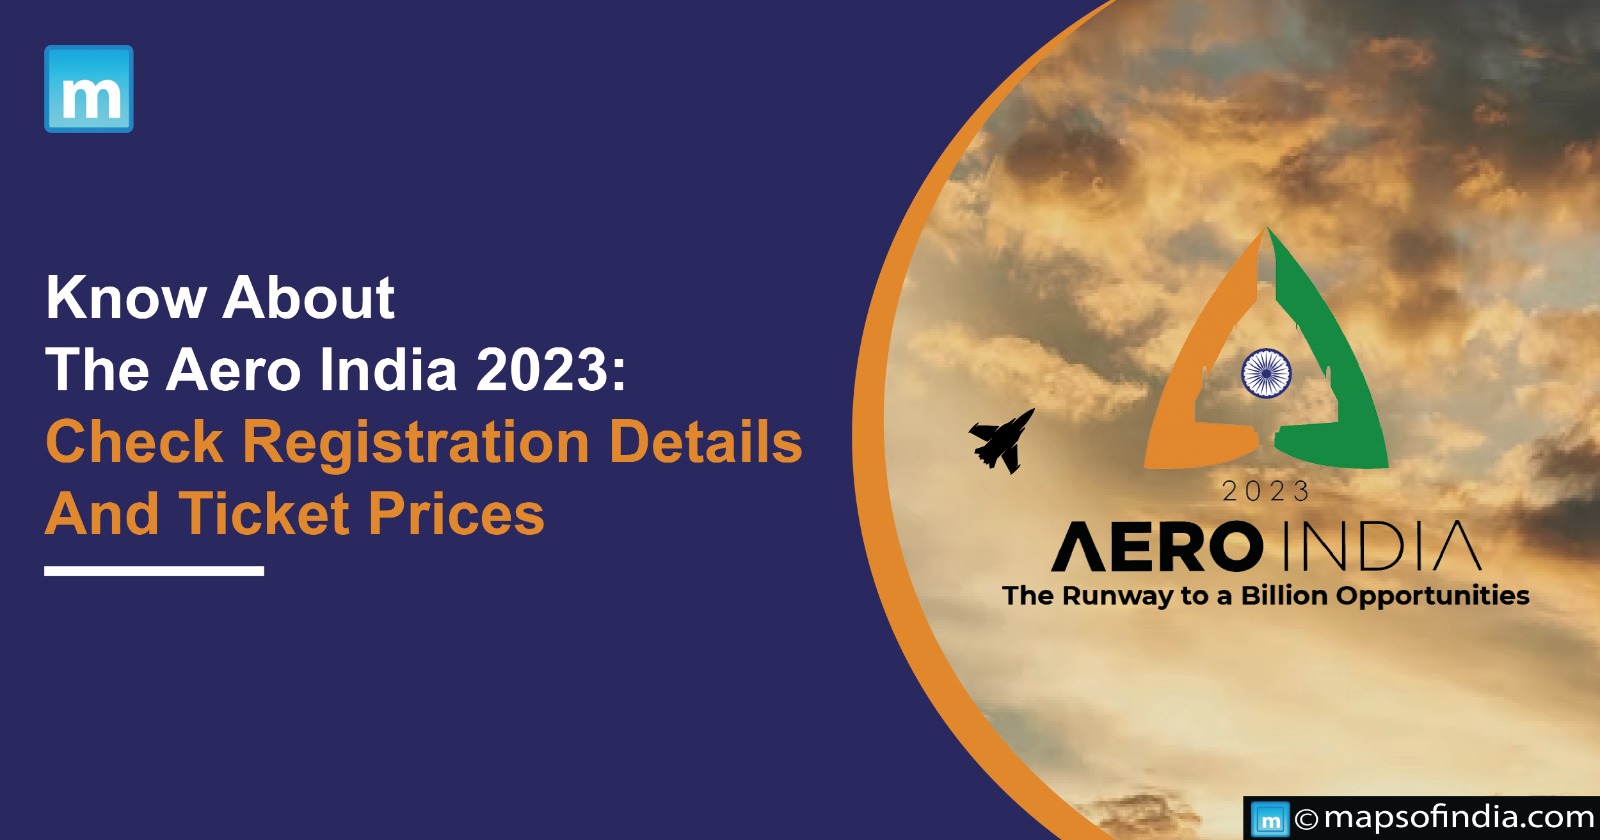 Know About The Aero India 2023 Check Registration Details And Ticket